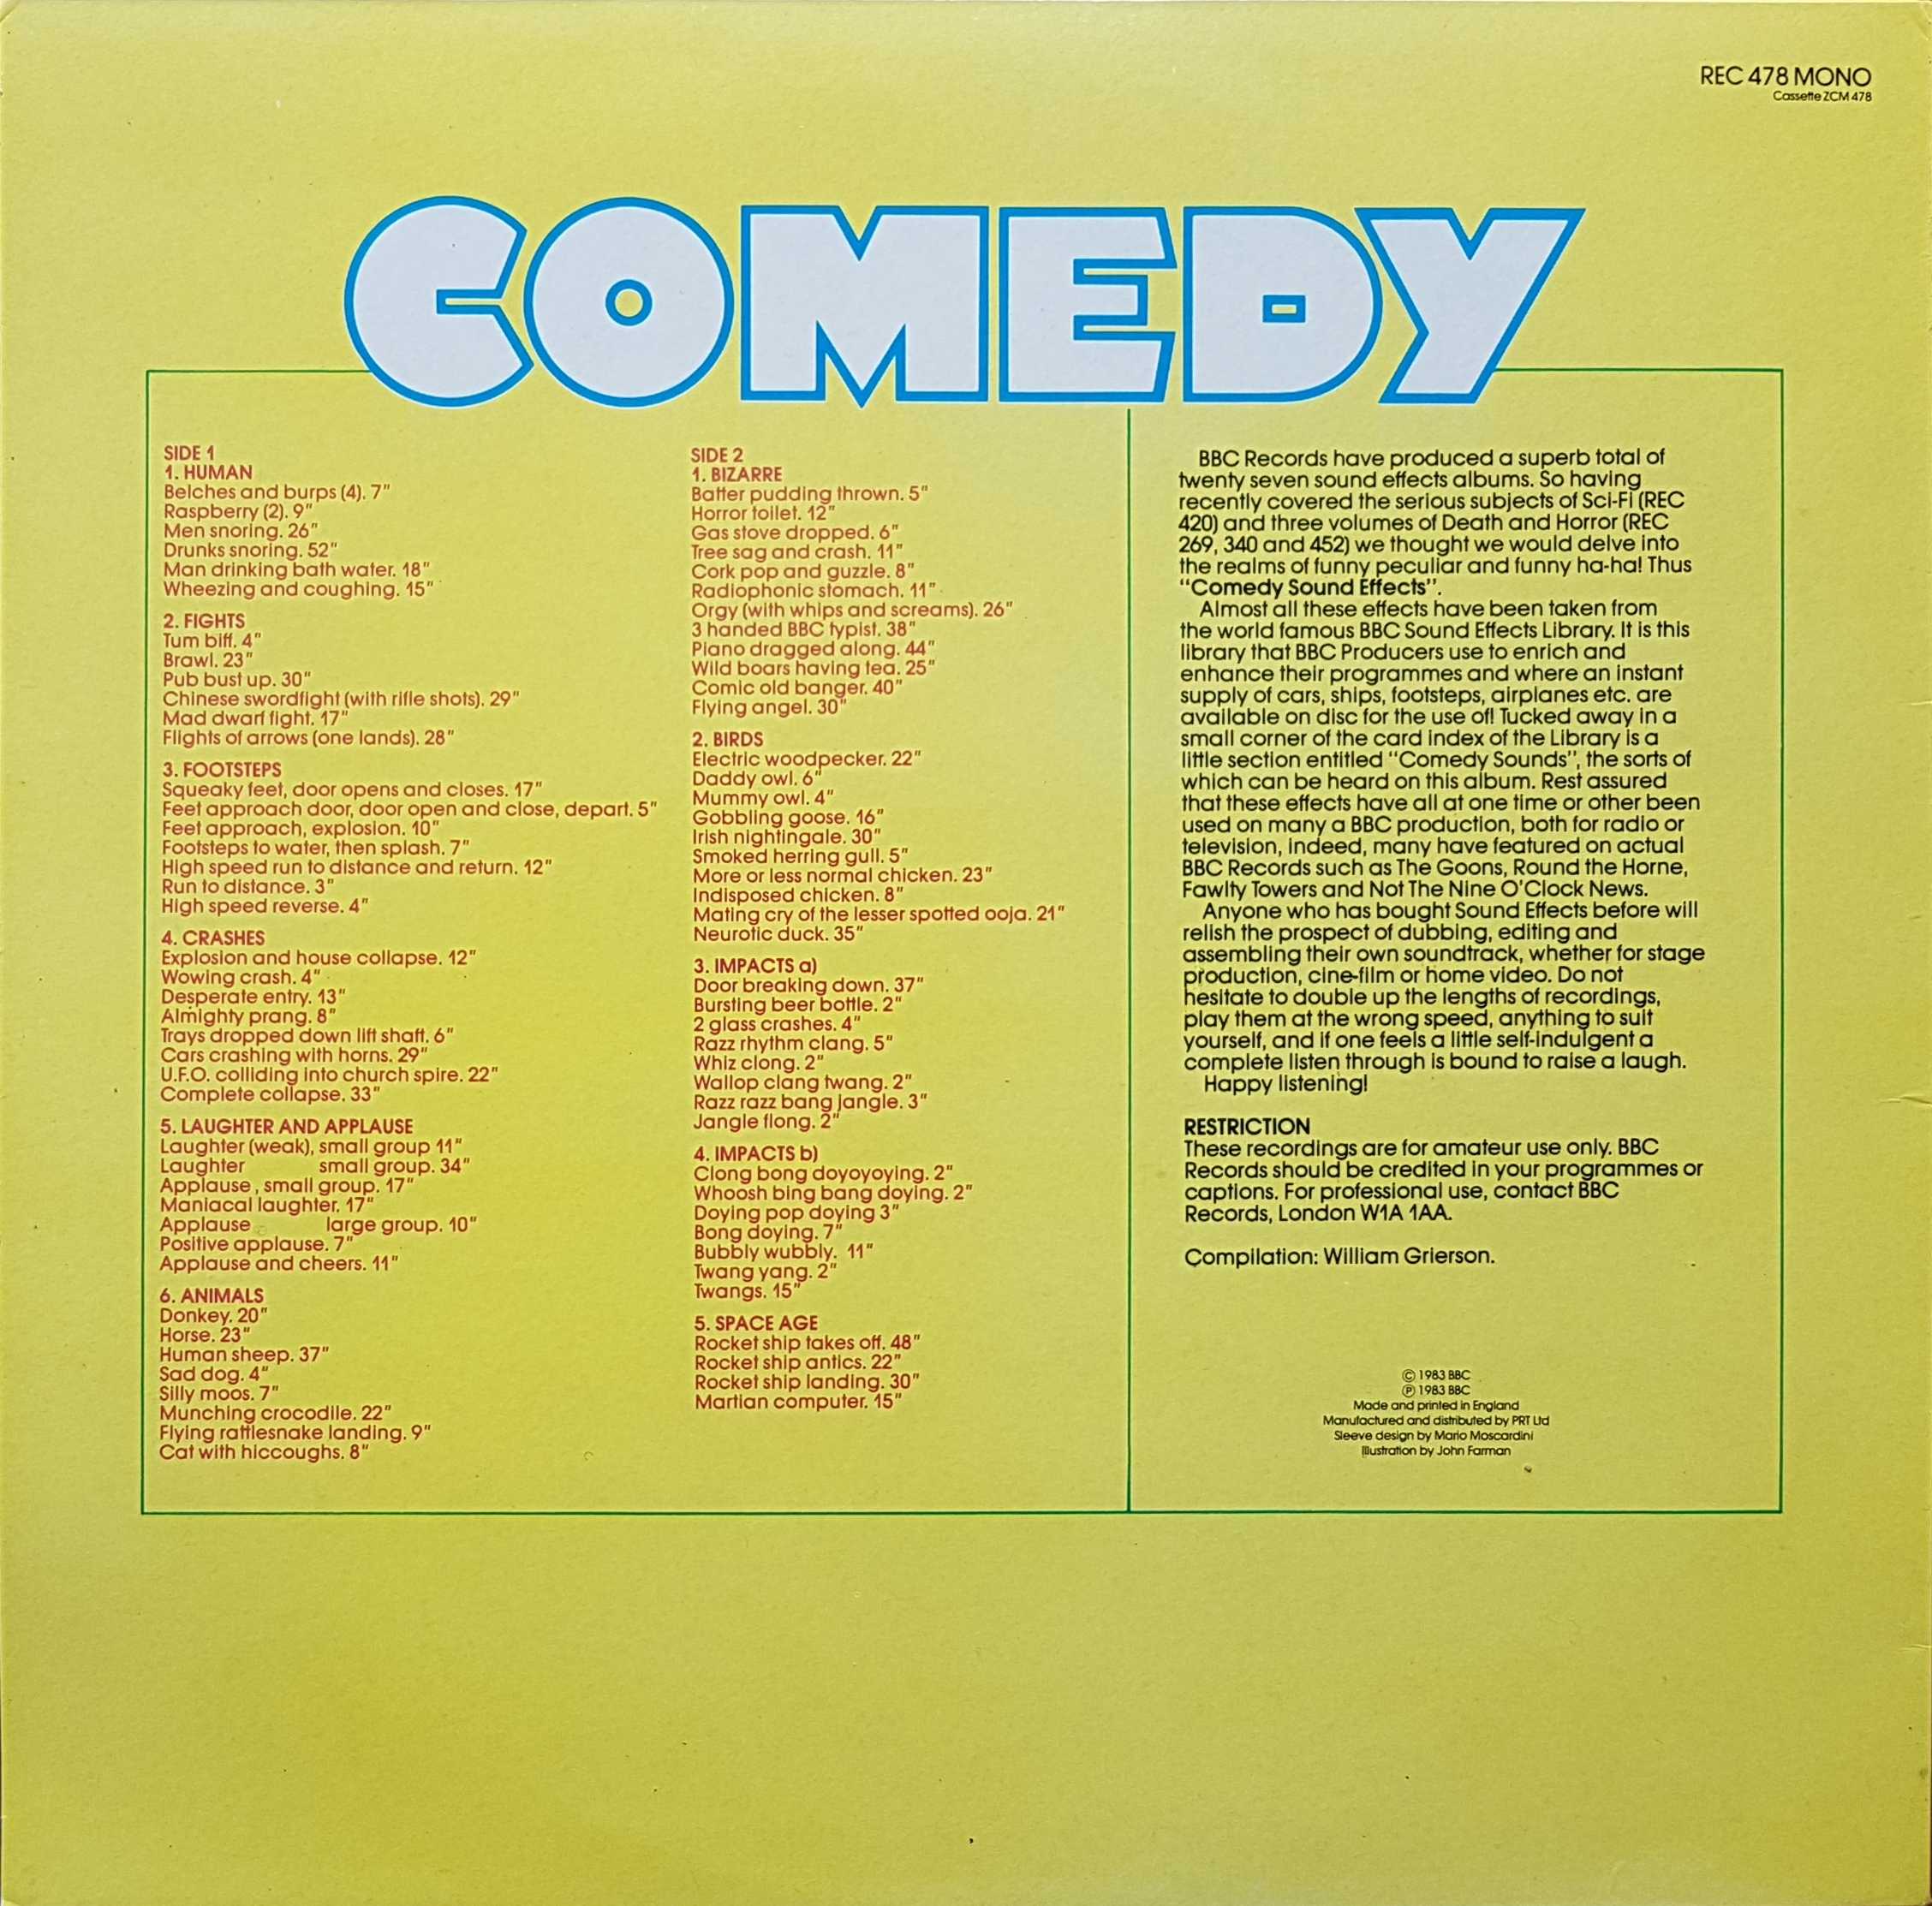 Picture of REC 478 Comedy sound effects by artist Various from the BBC records and Tapes library